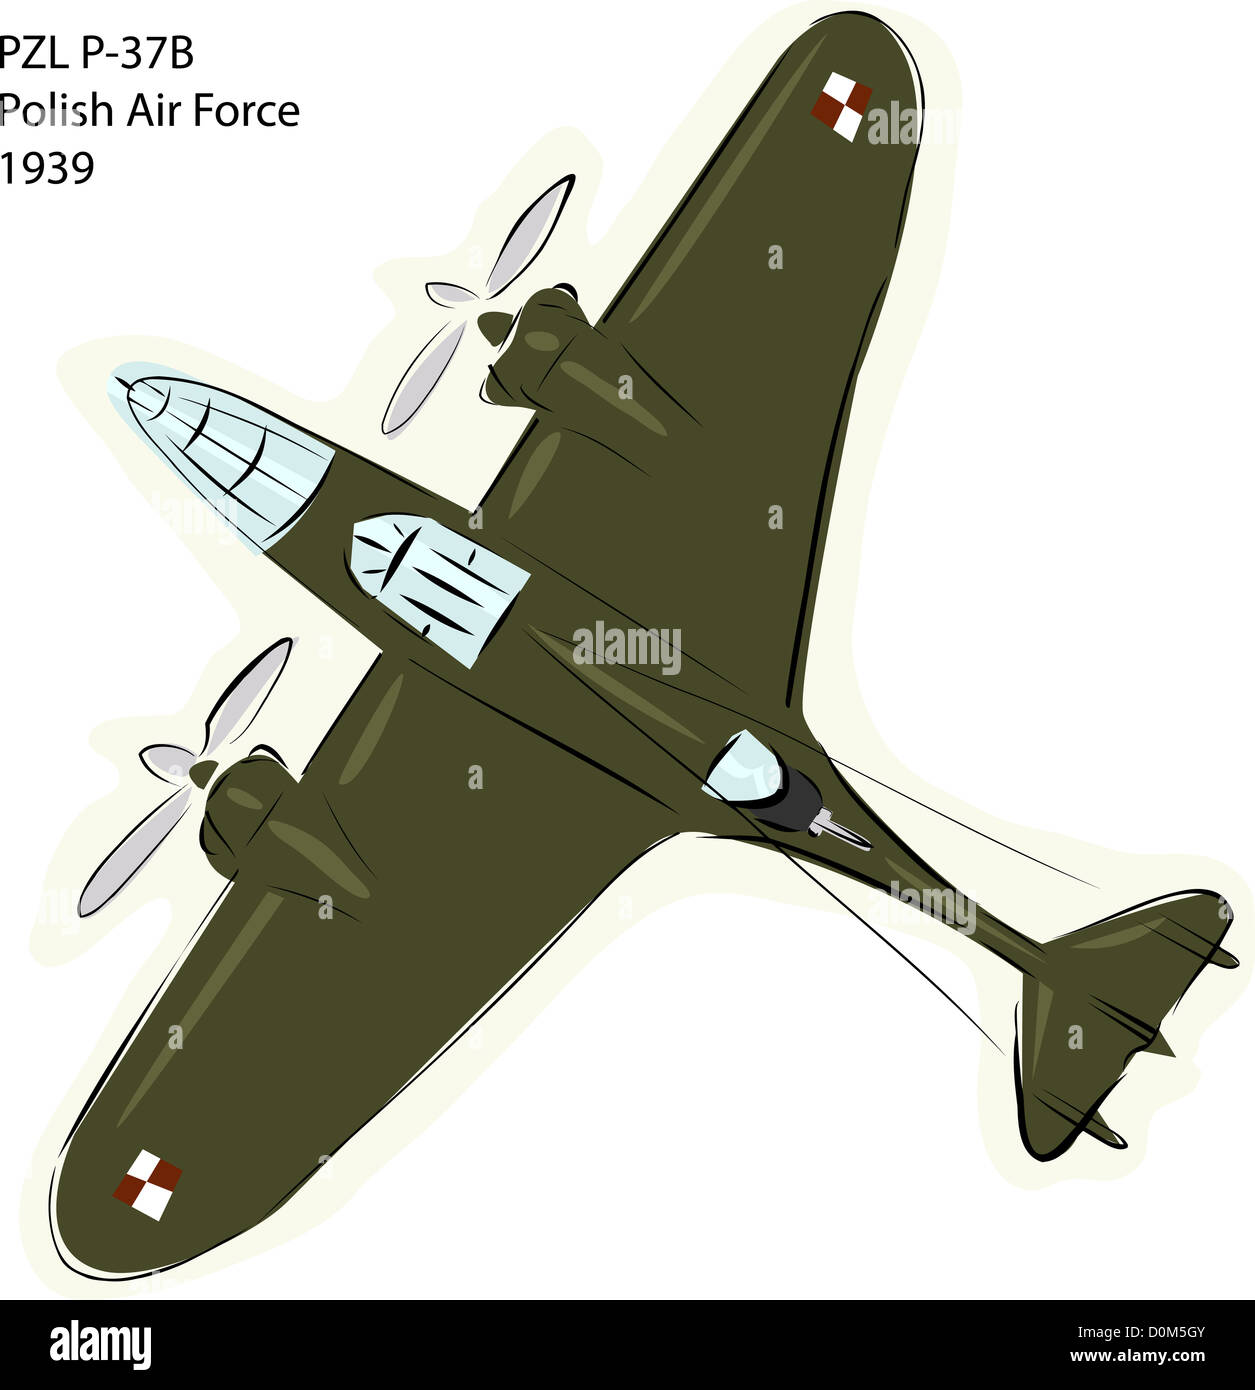 Sketch of PZL P-37B Polish Air Force combat plane over white Stock Photo